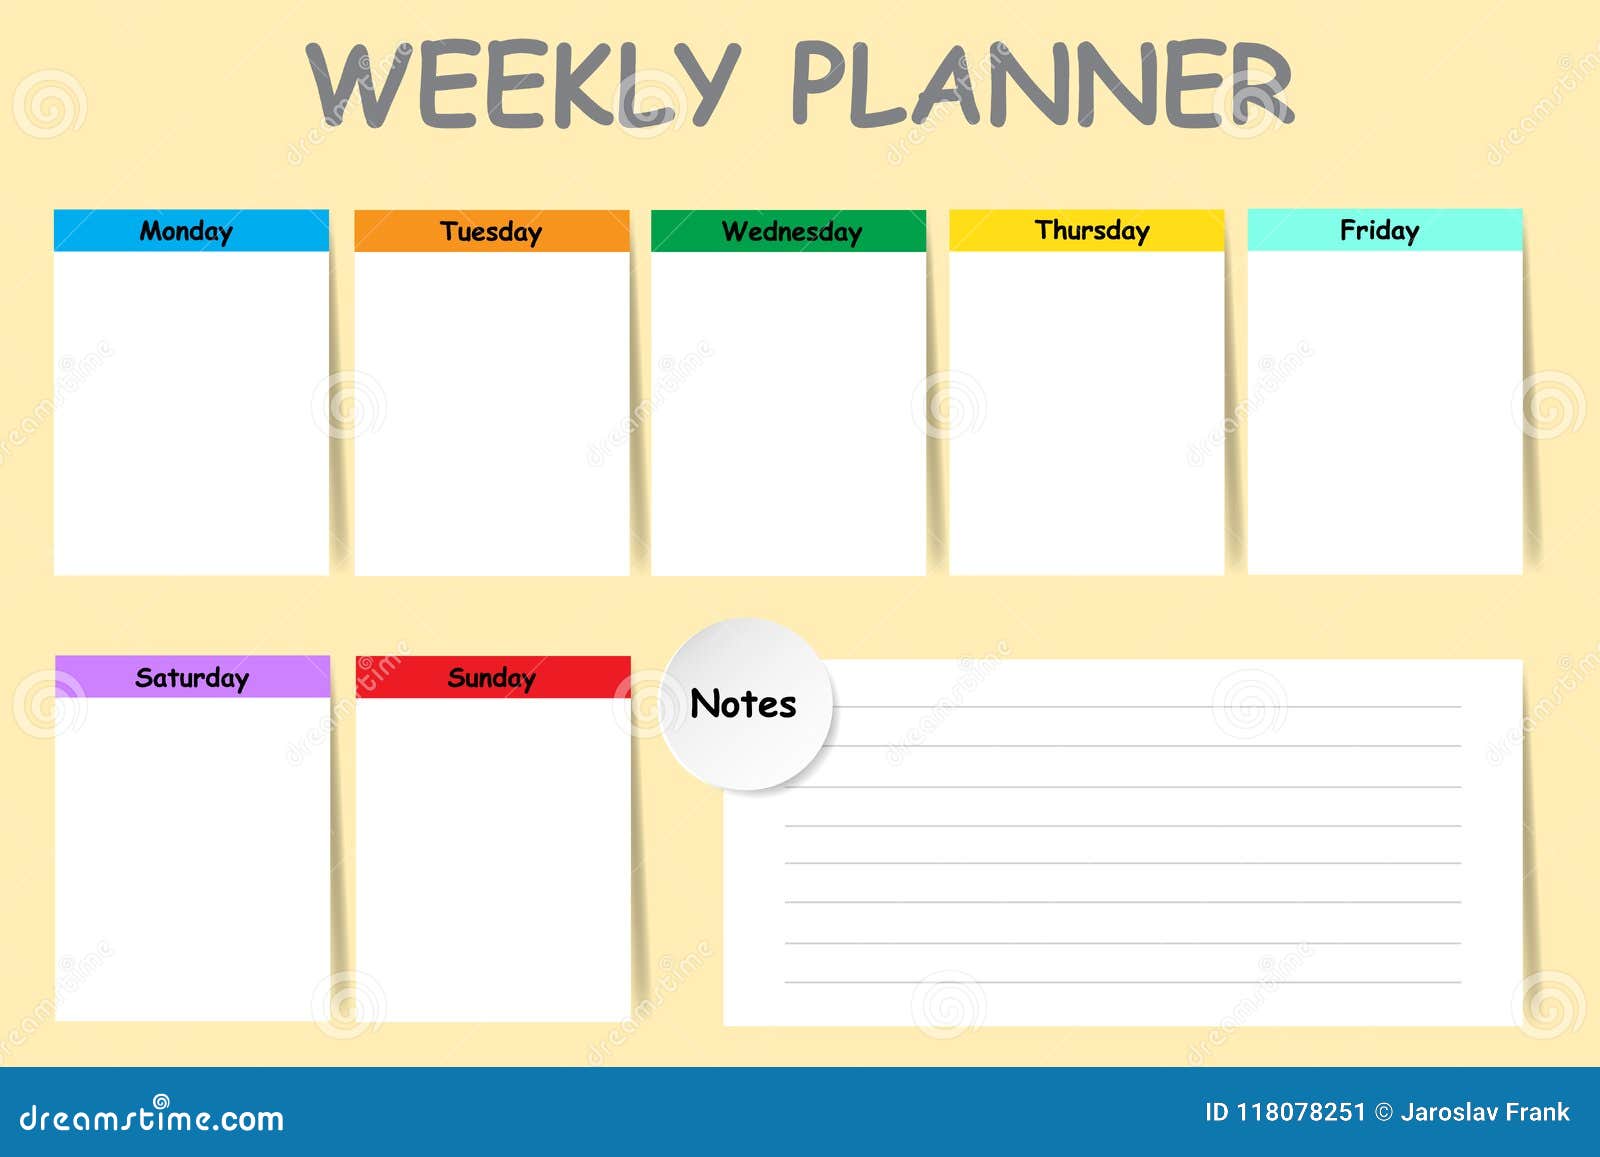 Weekly Planner Vector Concept On The Yellow Background